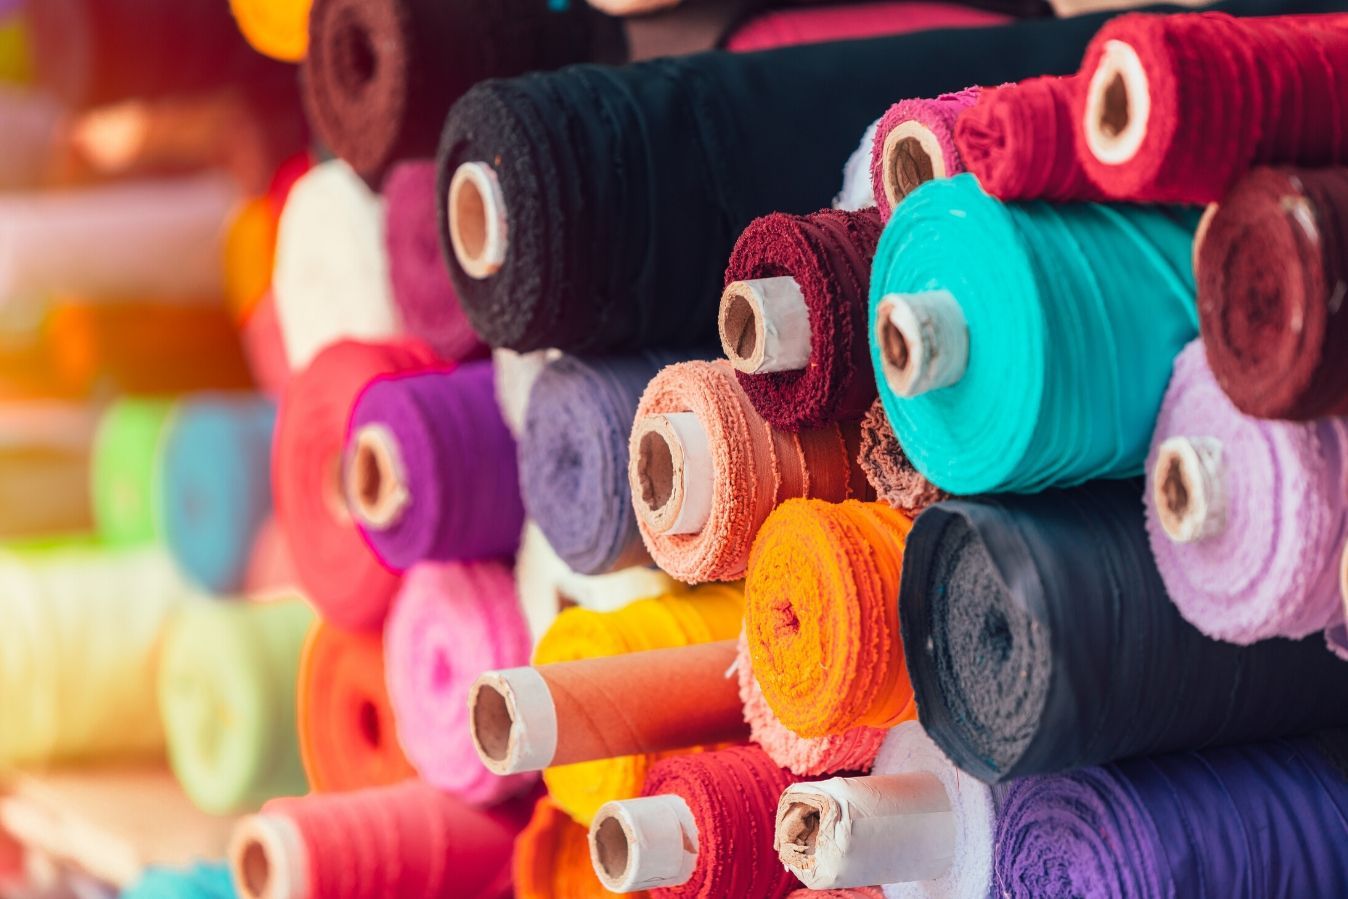 A Brief History of Fabric and Textiles